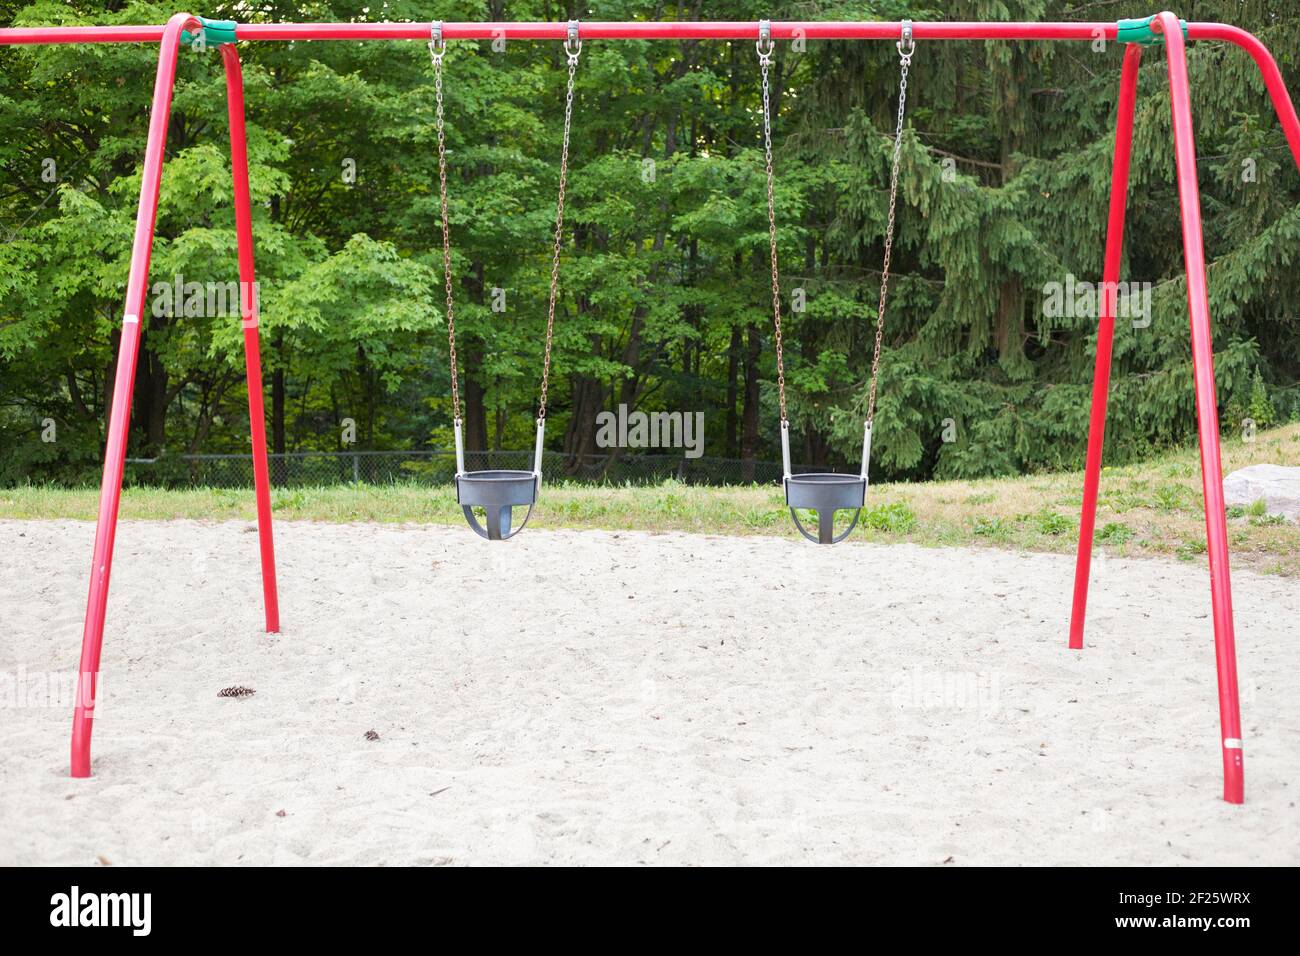 Swings for small children in the public park playground. Stock Photo